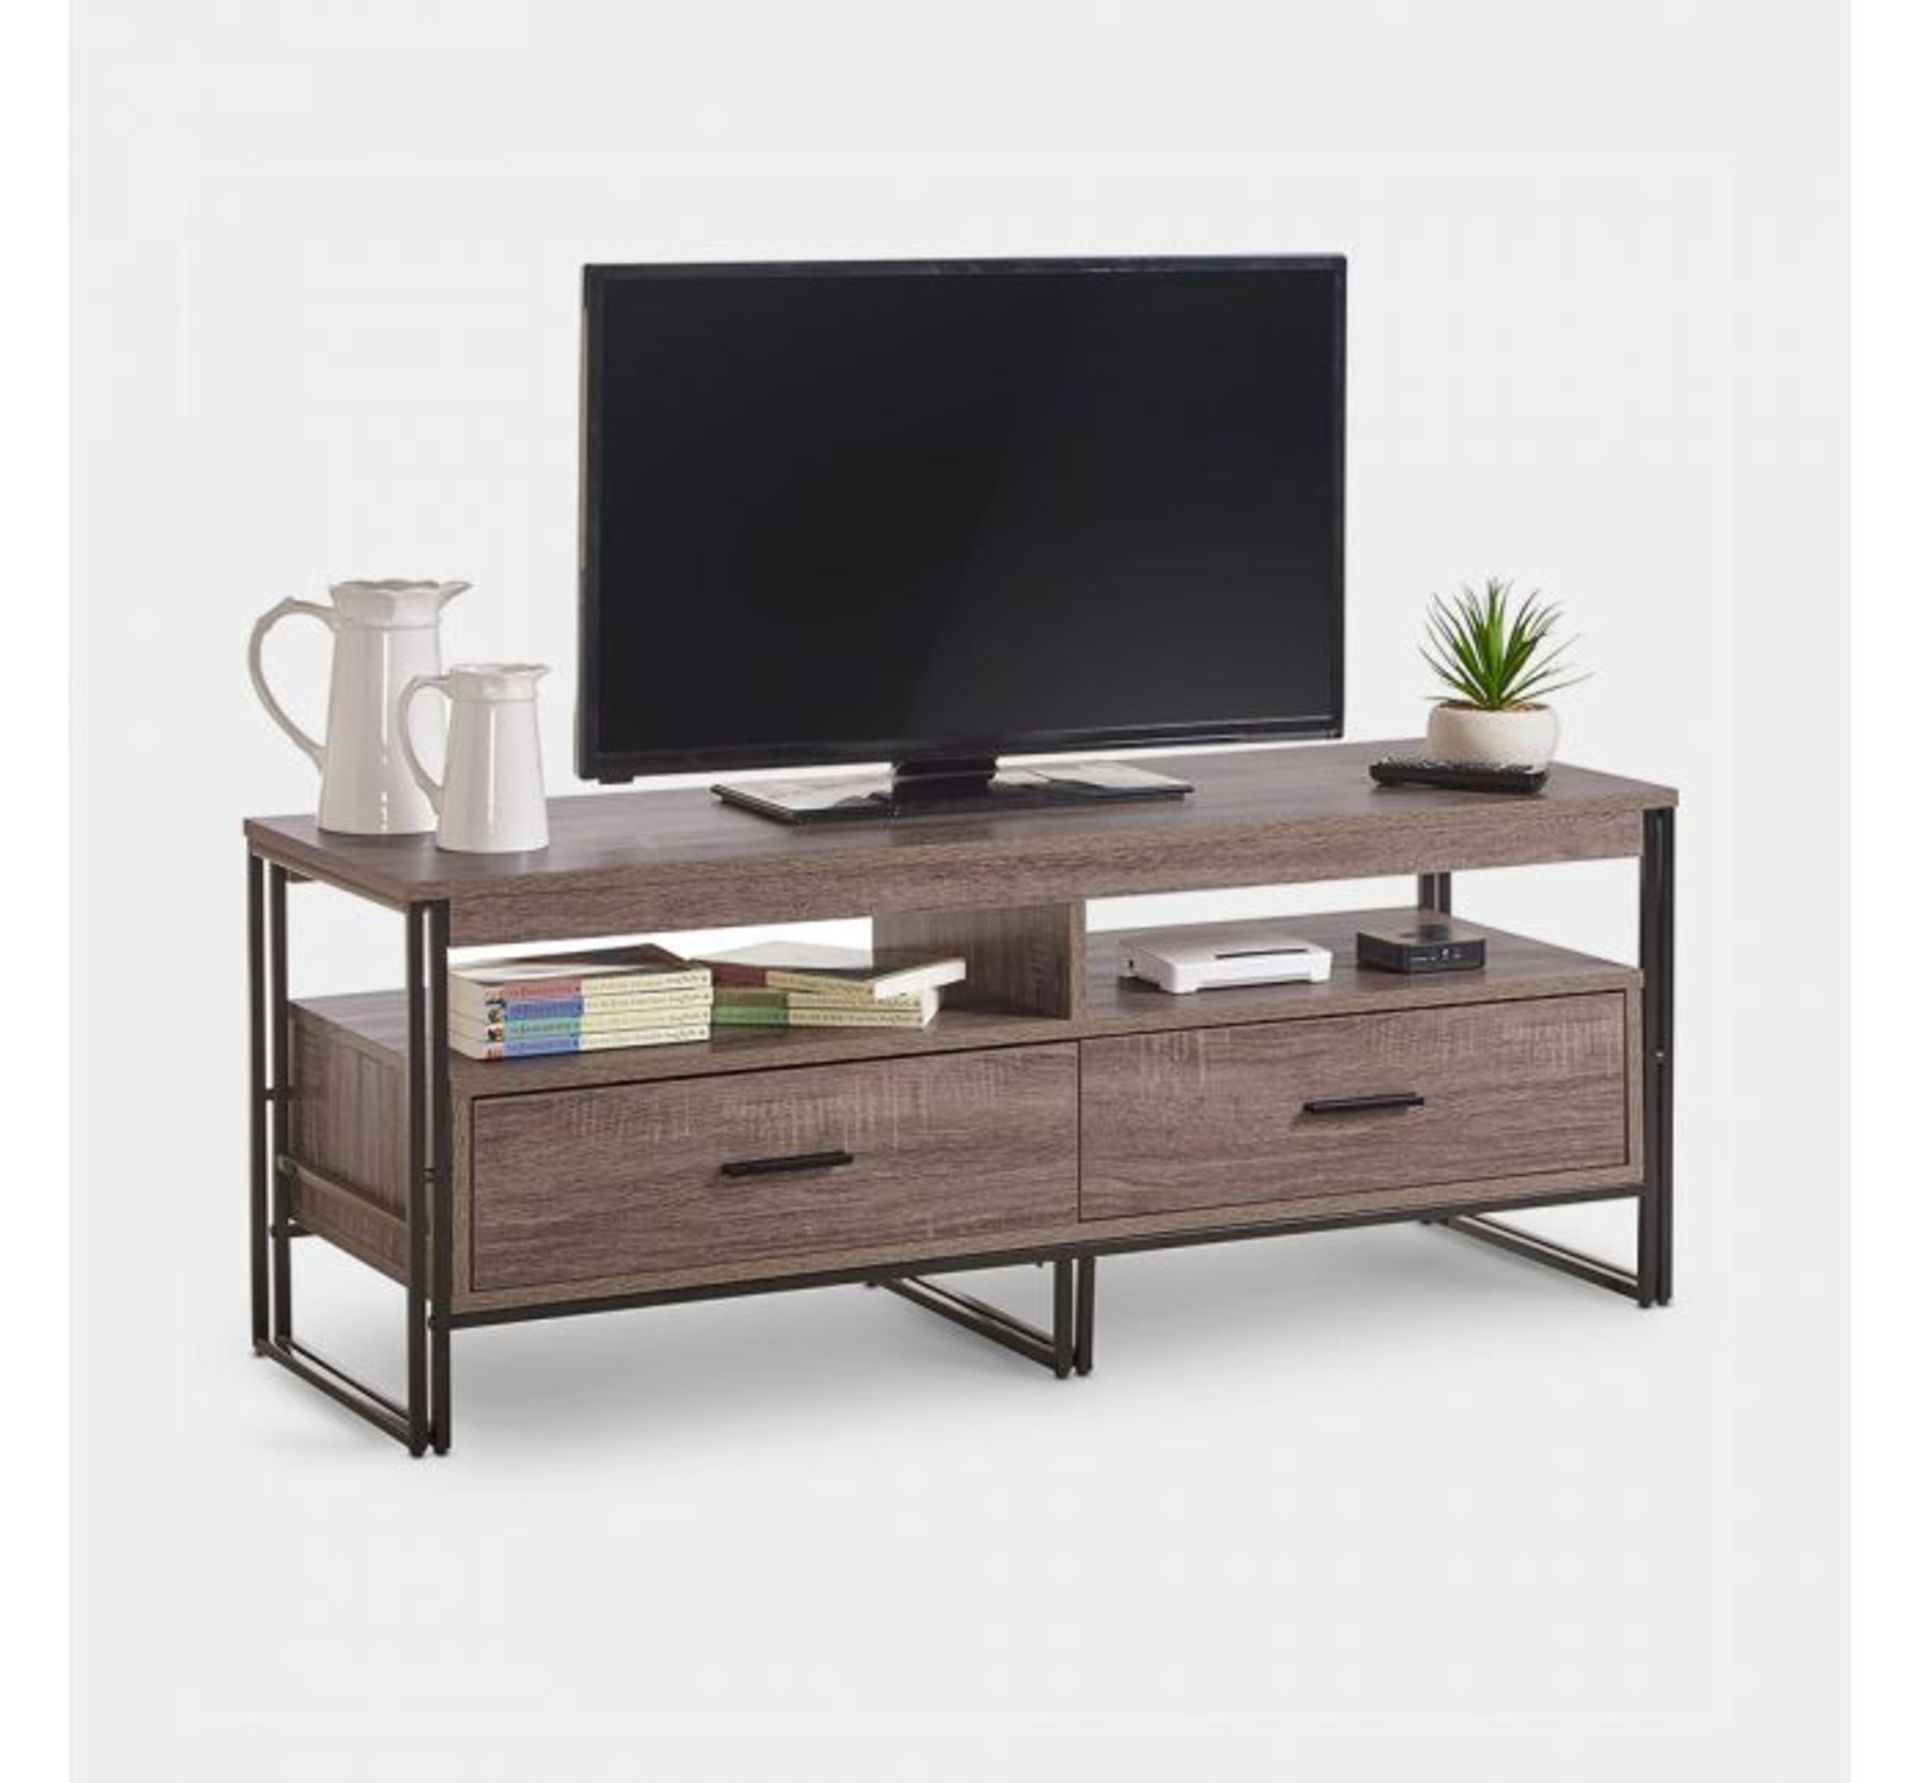 (HZ56) Rustic Walnut TV Unit With 2 Drawers Handy TV unit makes a practical and stylish additi... - Image 2 of 3